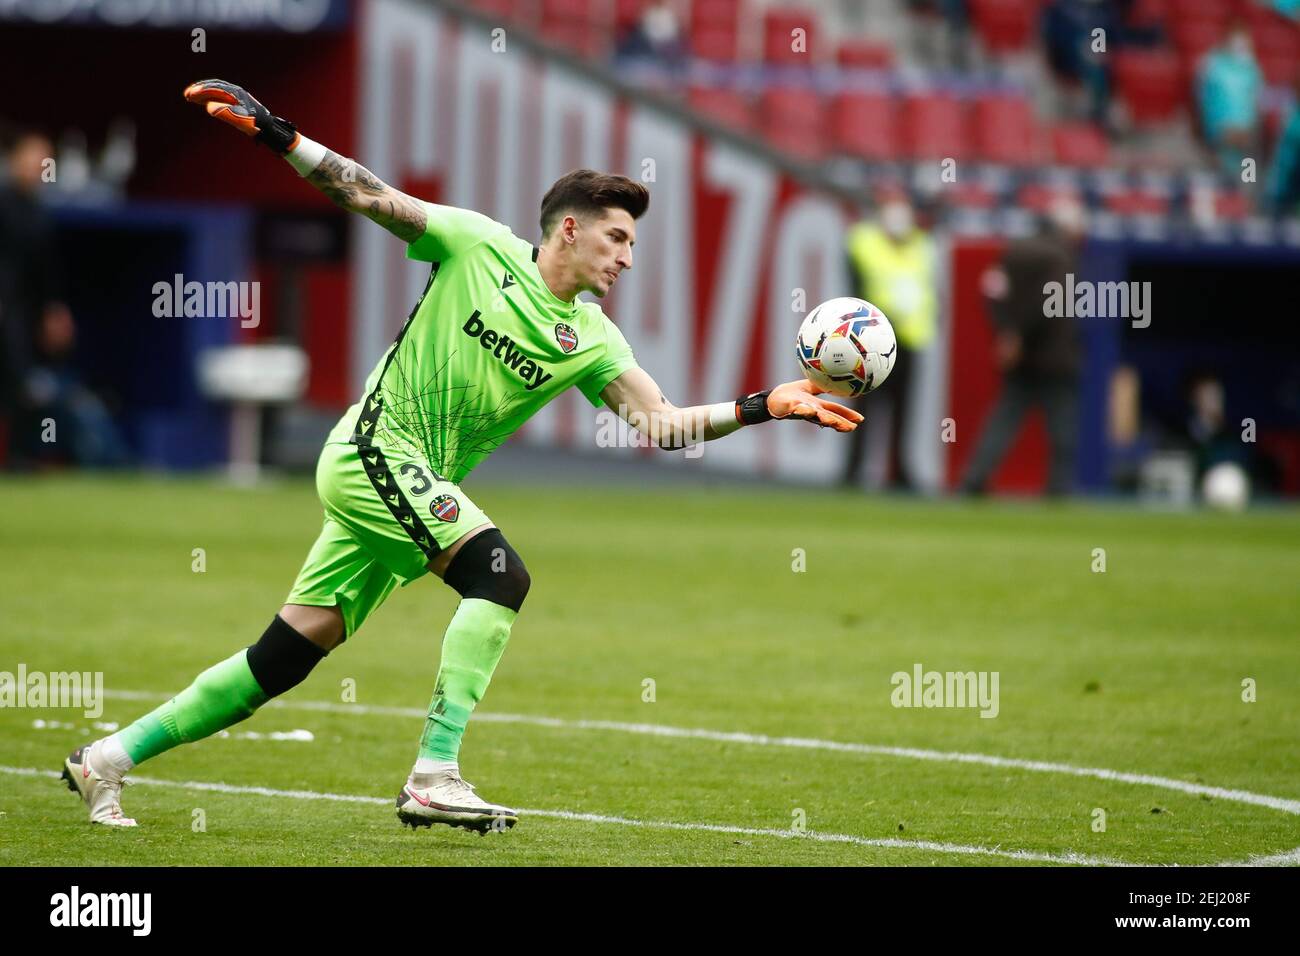 Dani Cardenas of Levante during the Spanish championship La Liga football match between Atletico de Madrid and Levante UD on fe / LM Stock Photo